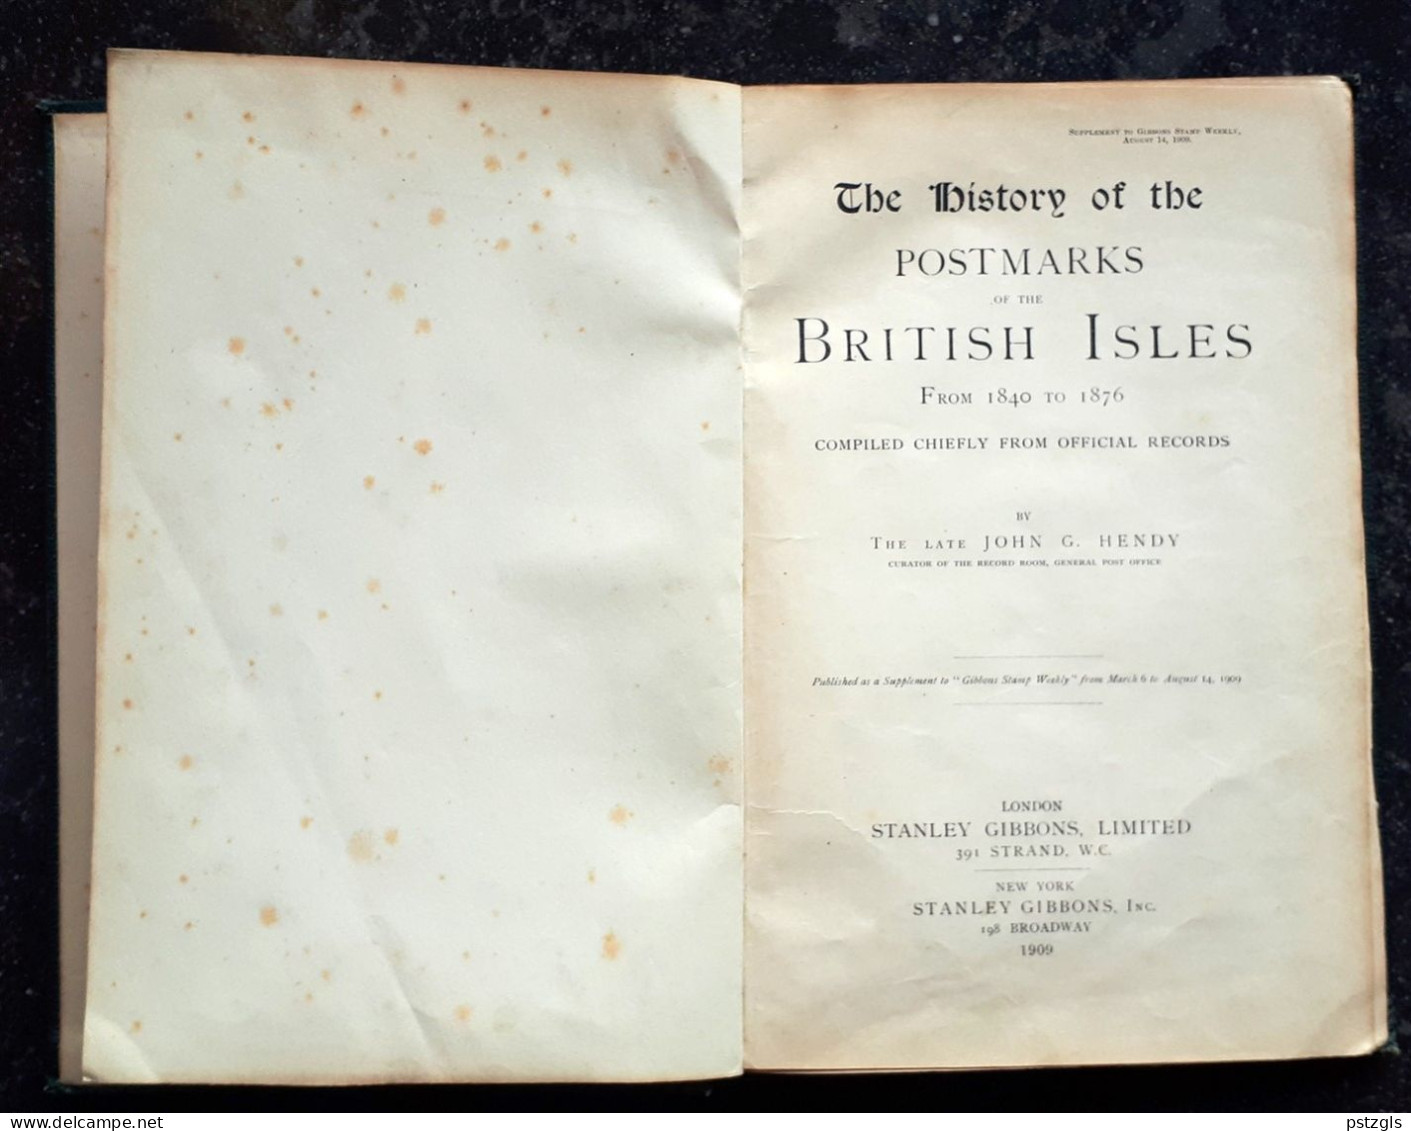 The History Of The Postmarks Of The British Isles From 1840 To 1876 - John G. Hendy - Matasellos